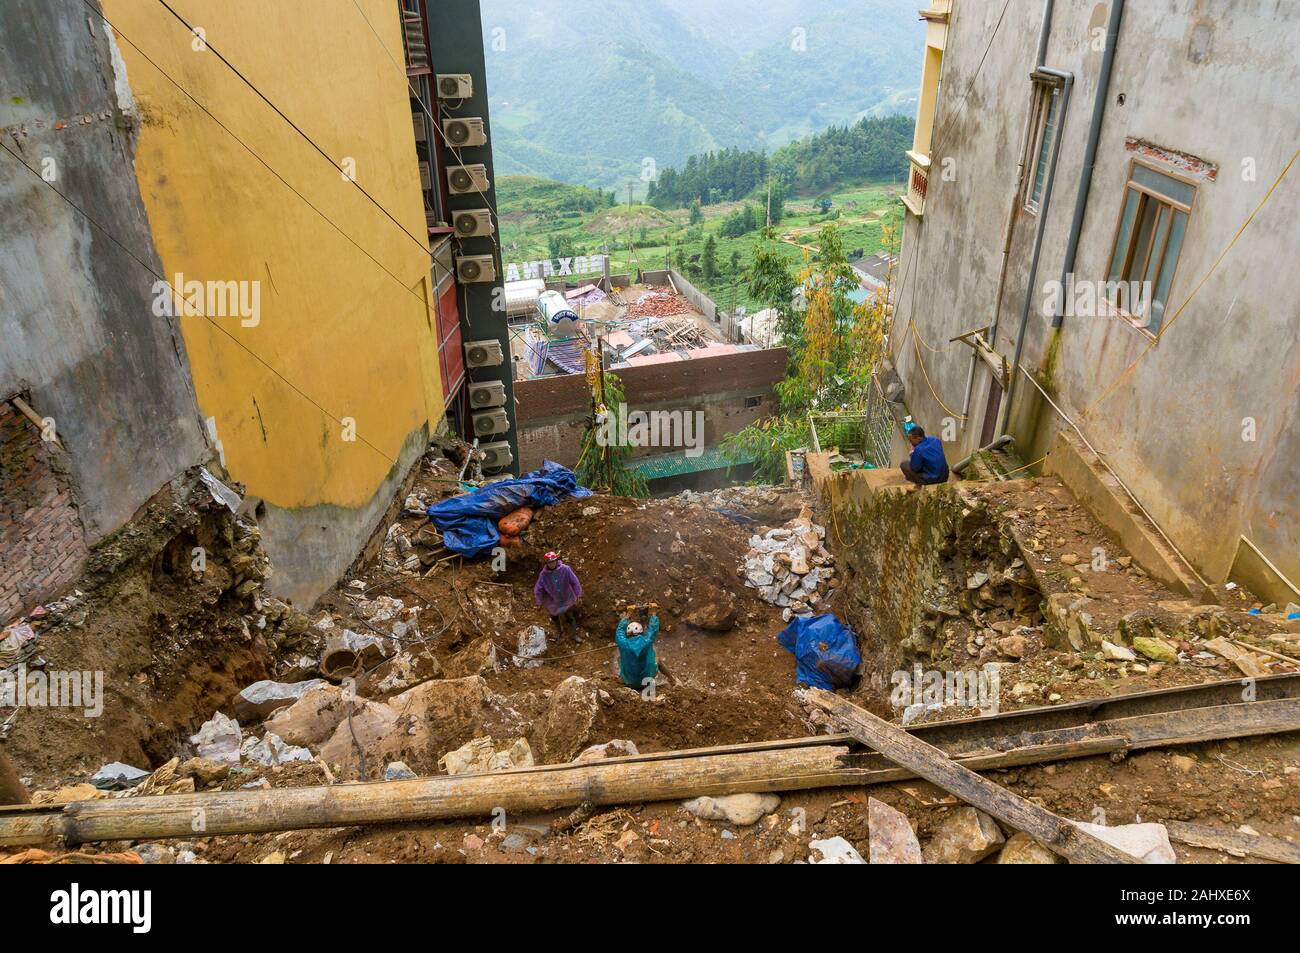 Sapa, Vietnam - August 19, 2017: Workers, builders at construction site in Sapa. Sapa is rapidly developing tourist attraction and popular travel dest Stock Photo